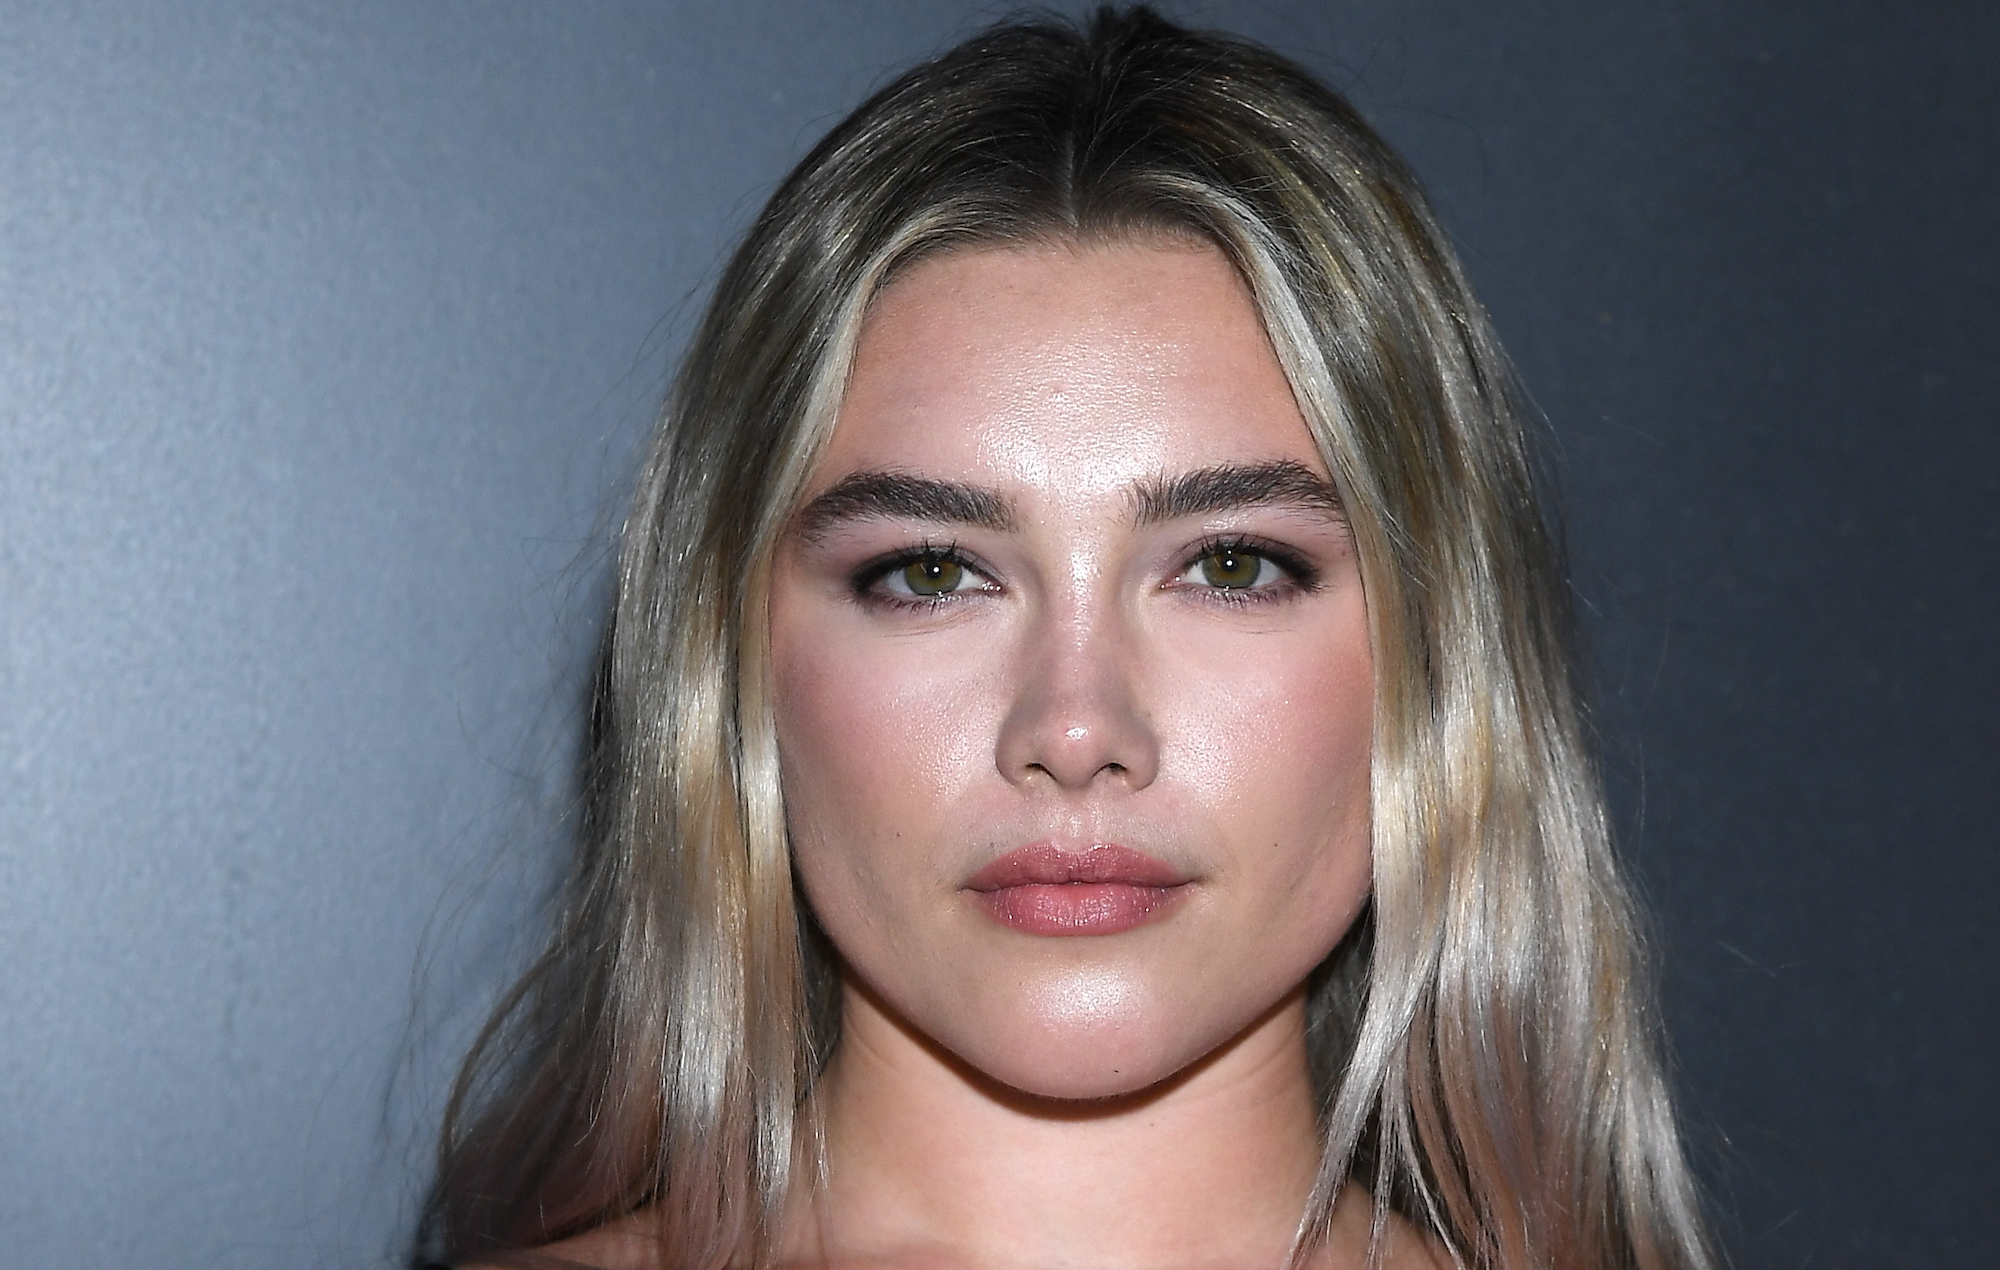 Florence Pugh: Movies, biography, news, early life, net worth, images and contact details